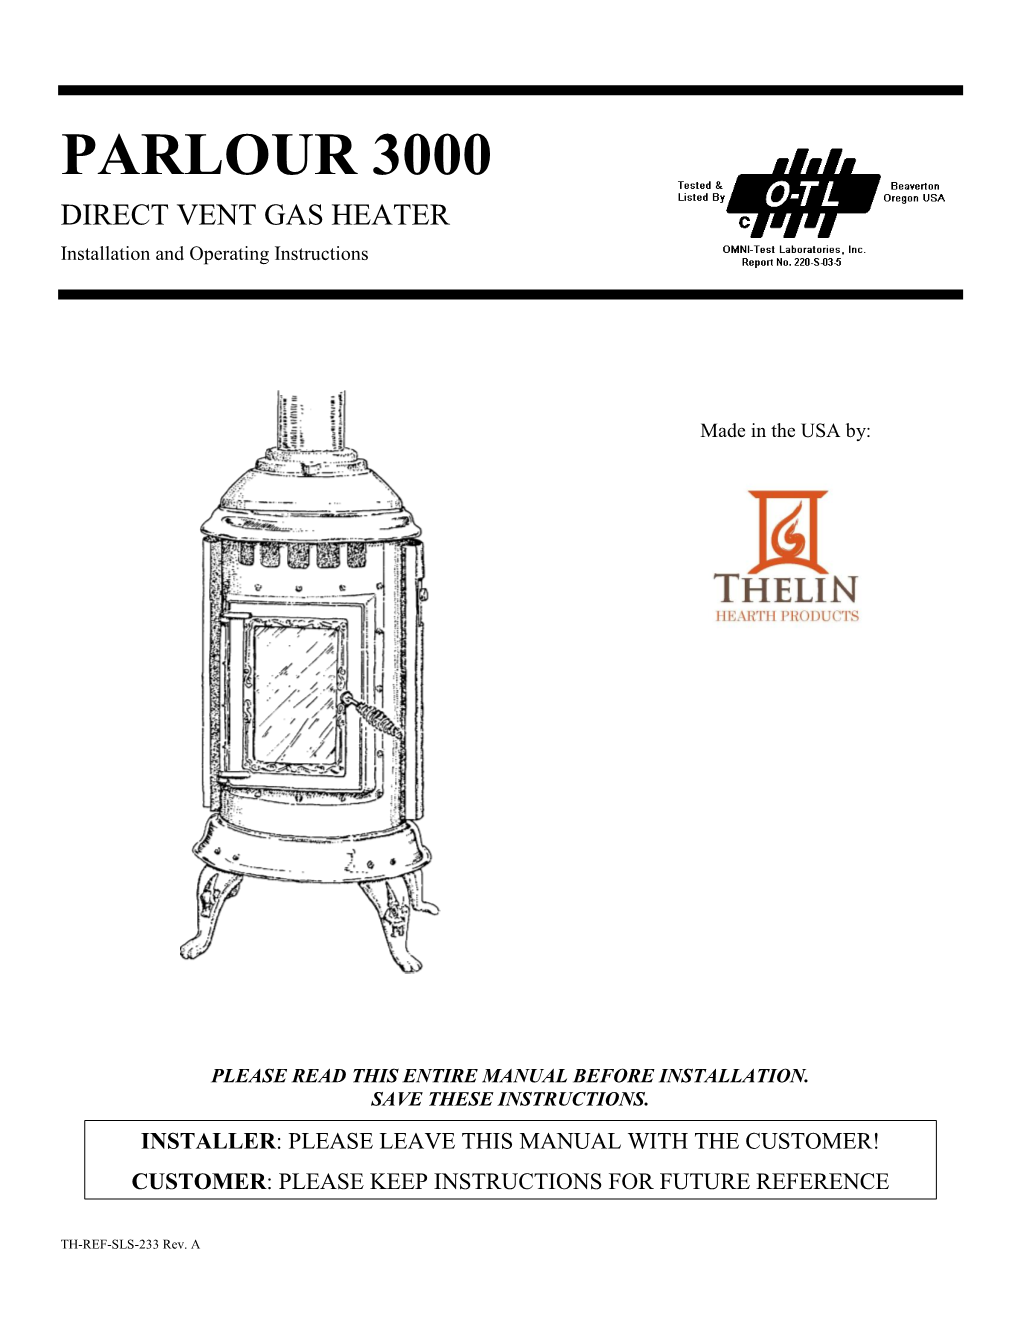 PARLOUR 3000 DIRECT VENT GAS HEATER Installation and Operating Instructions